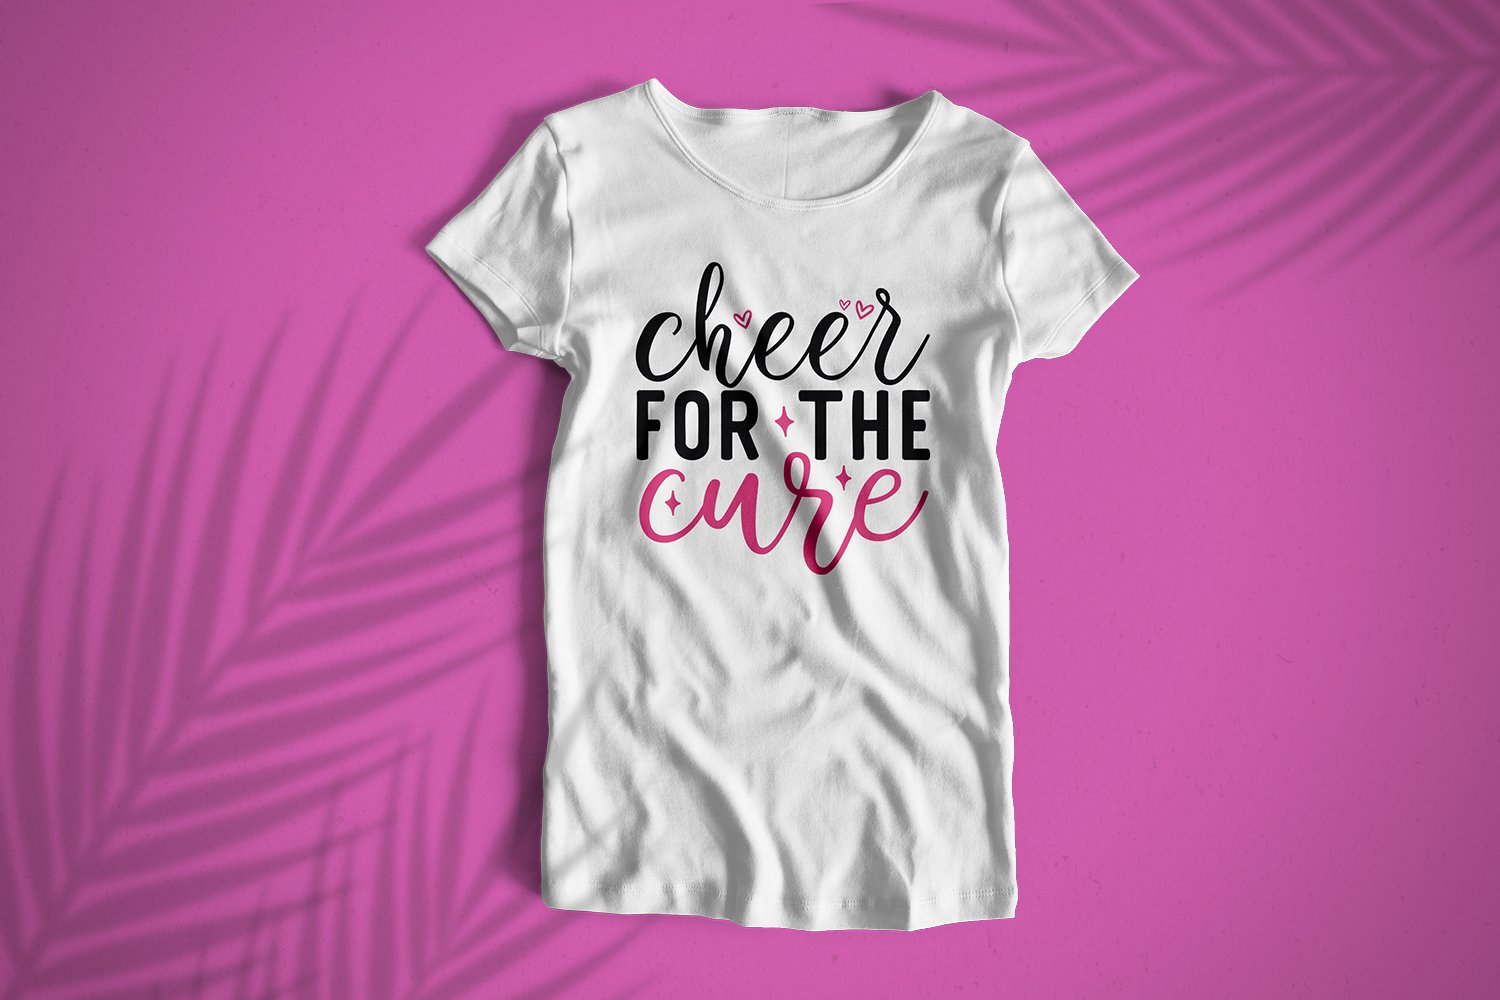 White t-shirt with breast cancer quote.